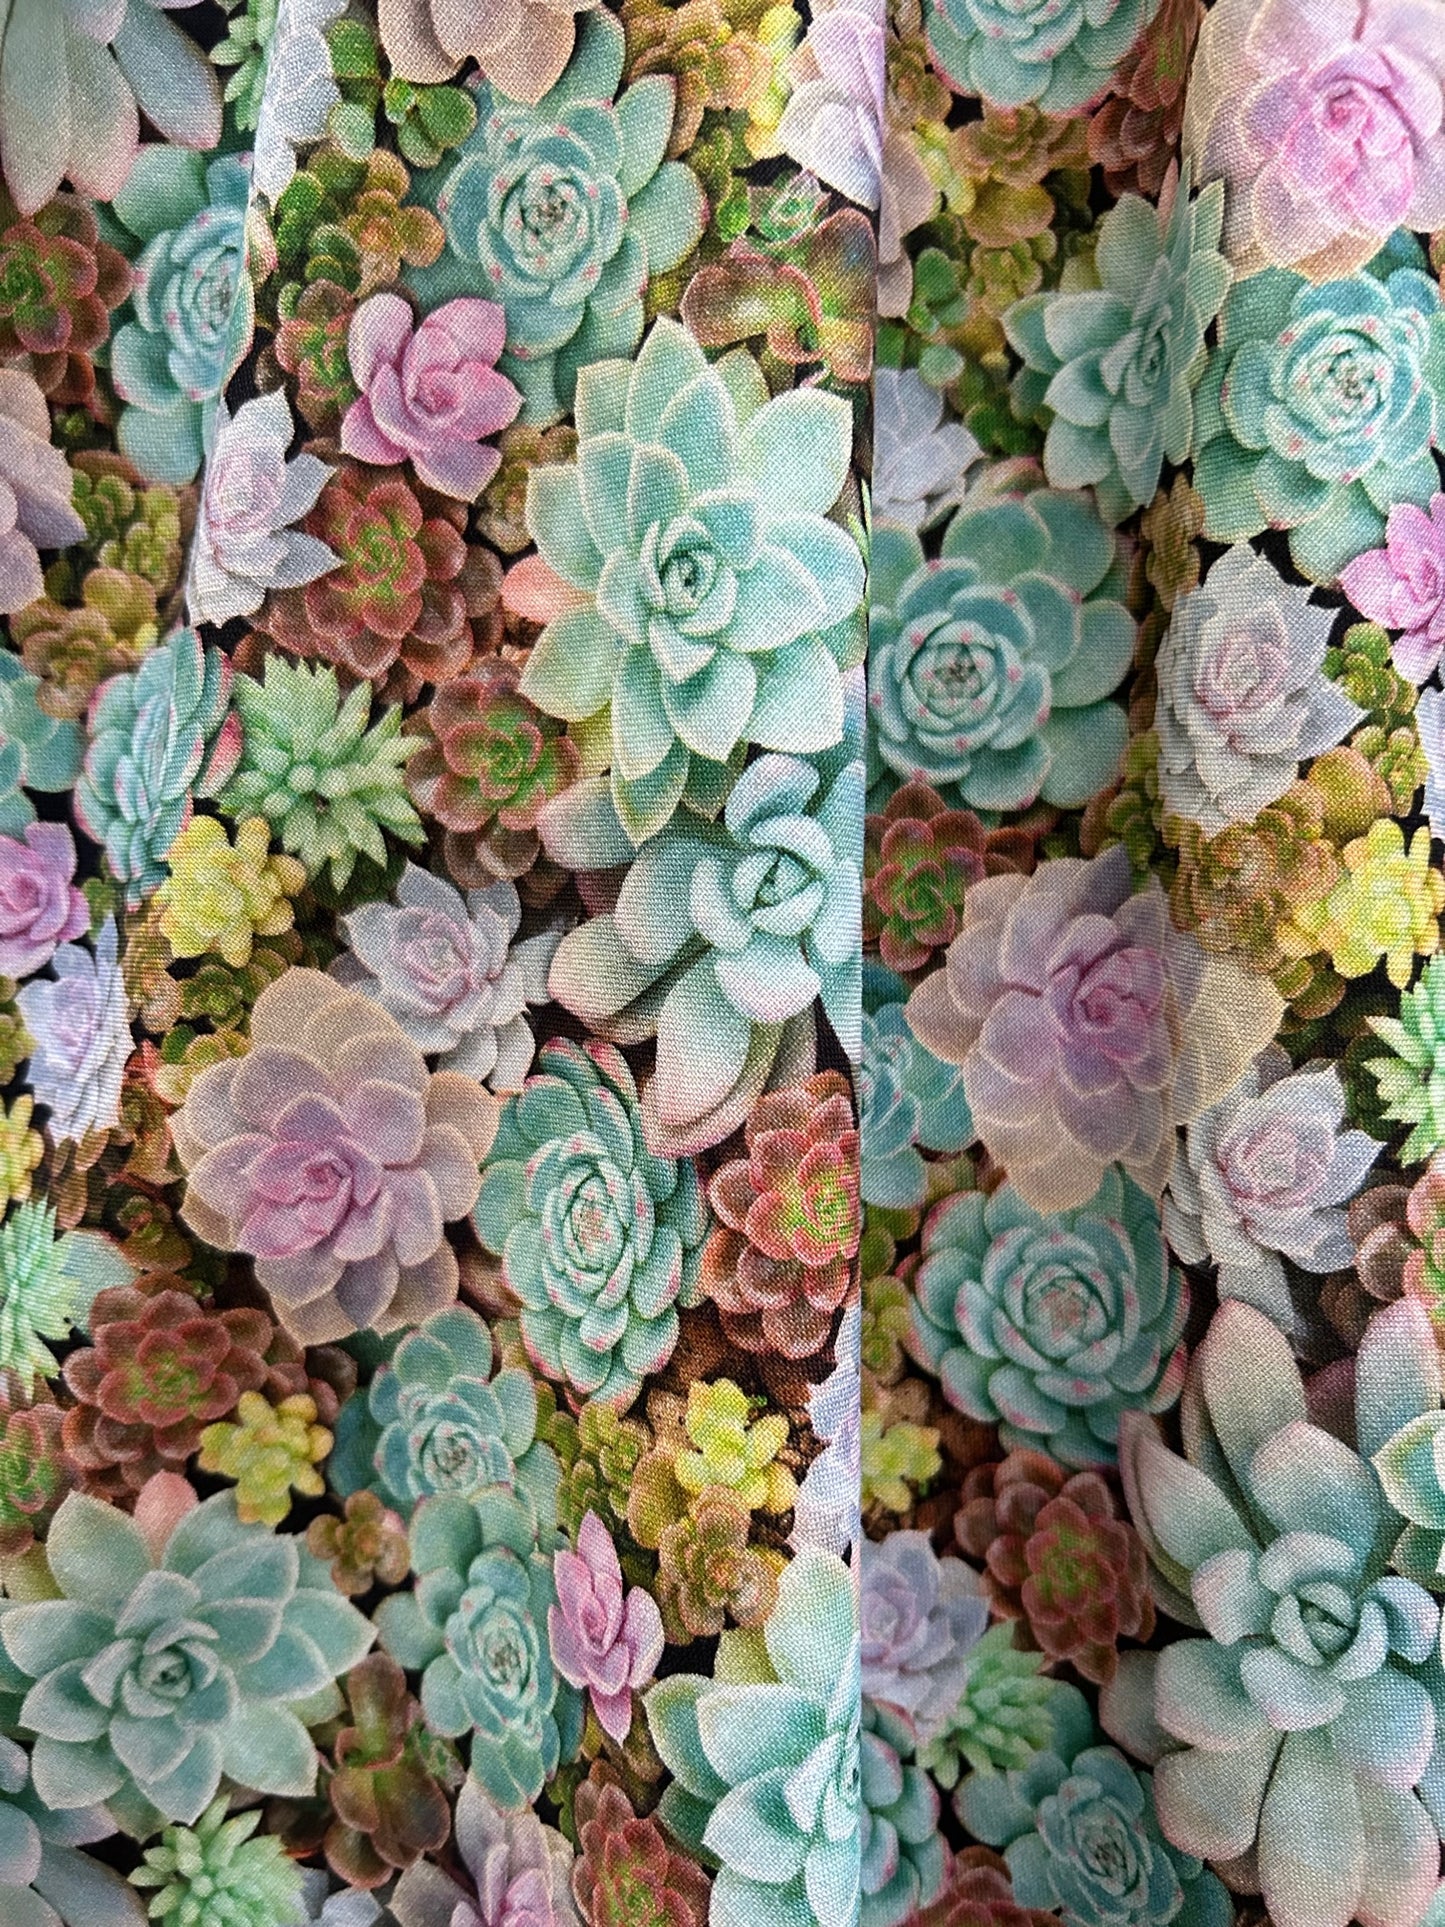 a close up of the fabric showing tightly packed succulents in pastel colors